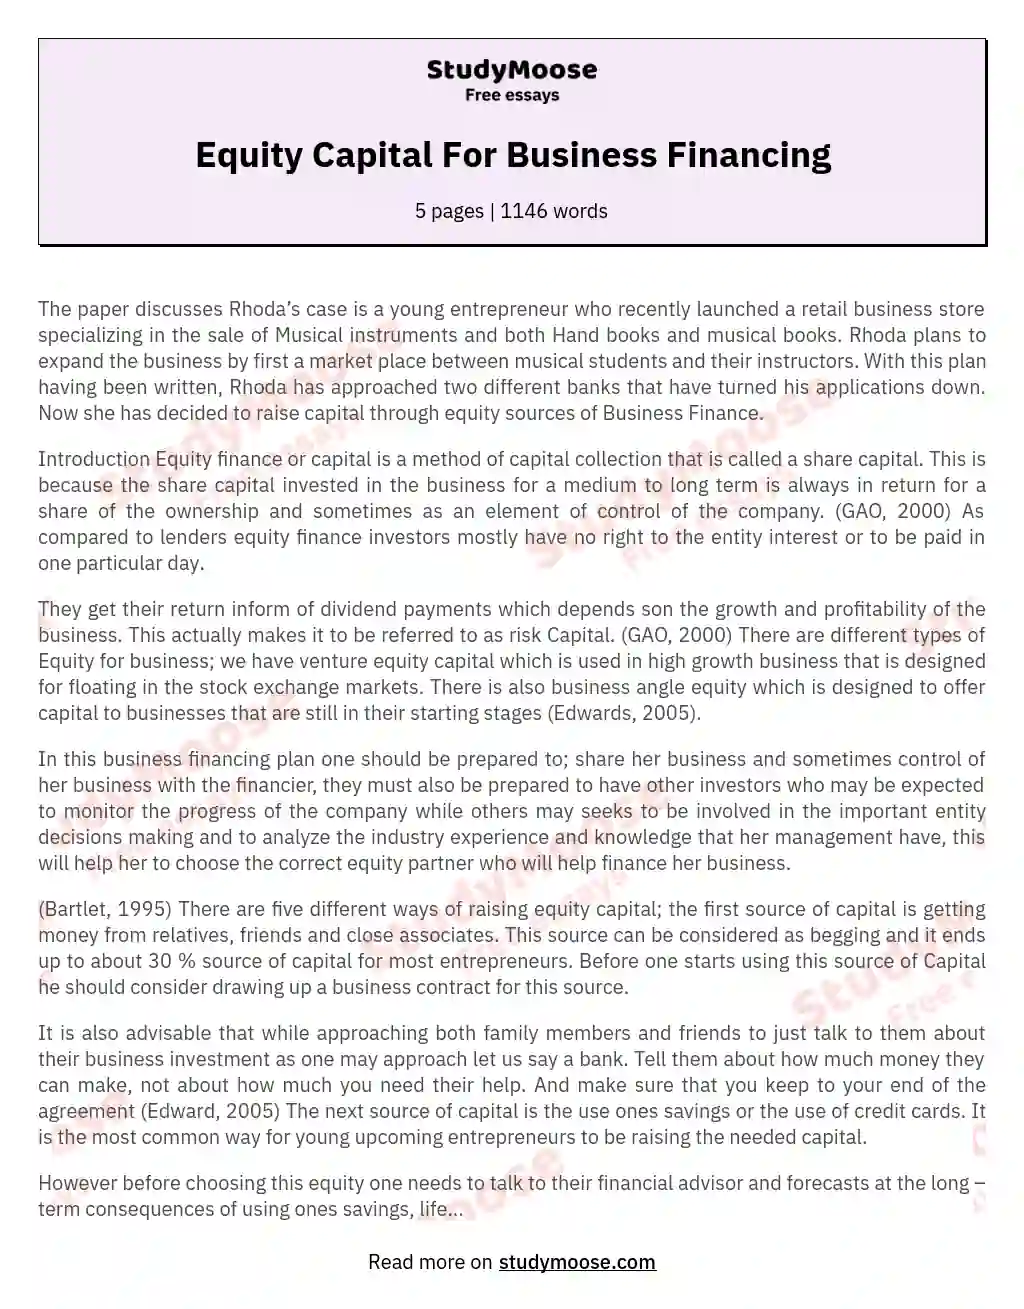 Equity Capital For Business Financing essay